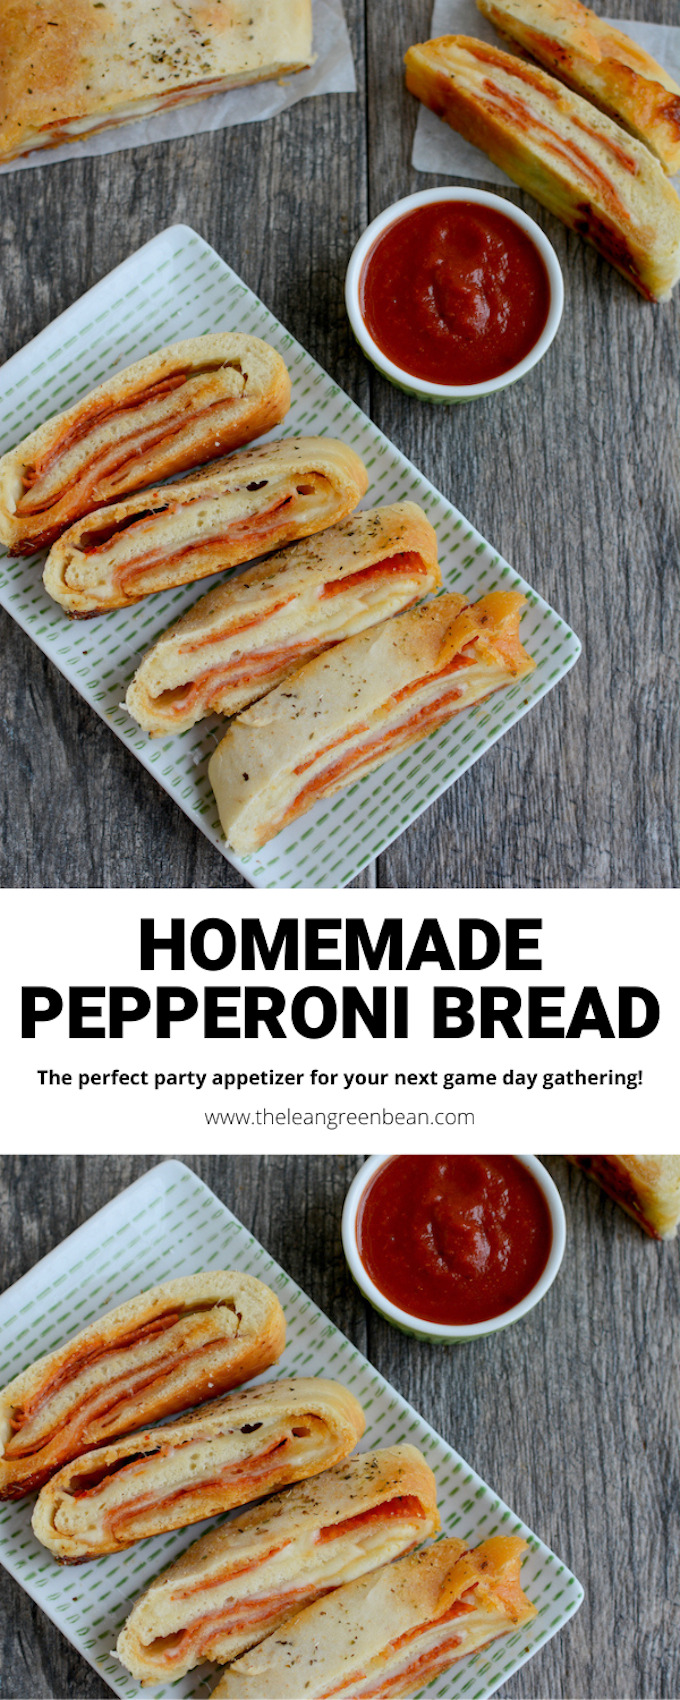 This homemade pepperoni bread is so delicious it's guaranteed to be a hit at your next tailgate or party! If you're short on time, use store-bought refrigerated pizza dough.